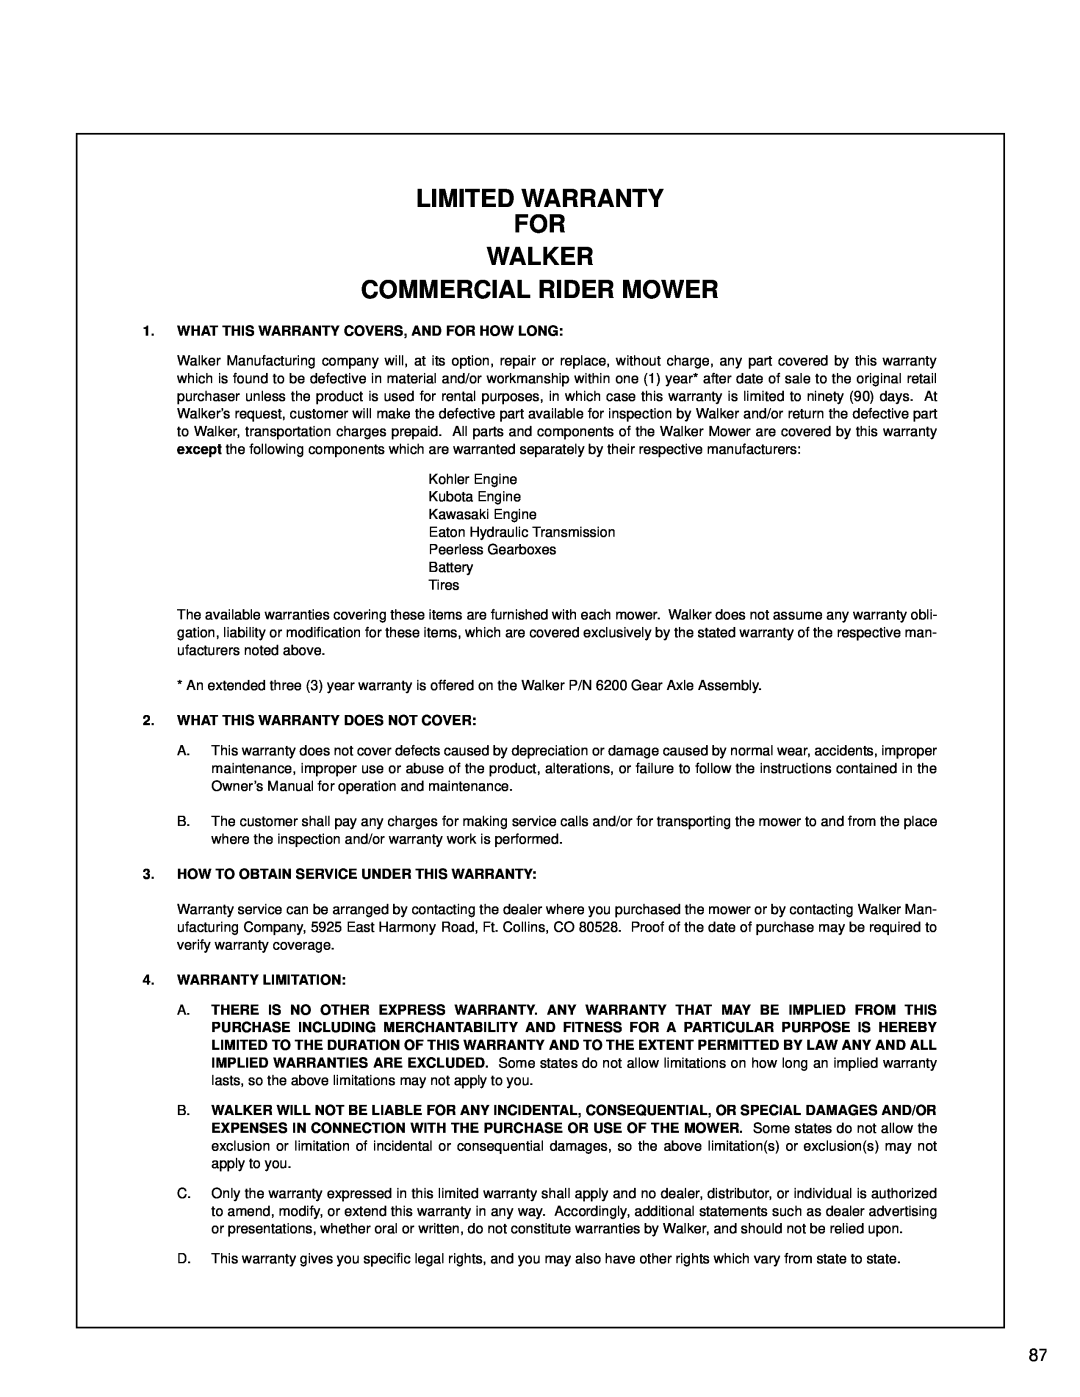 Walker MT owner manual Limited Warranty For Walker Commercial Rider Mower, What This Warranty Covers, And For How Long 